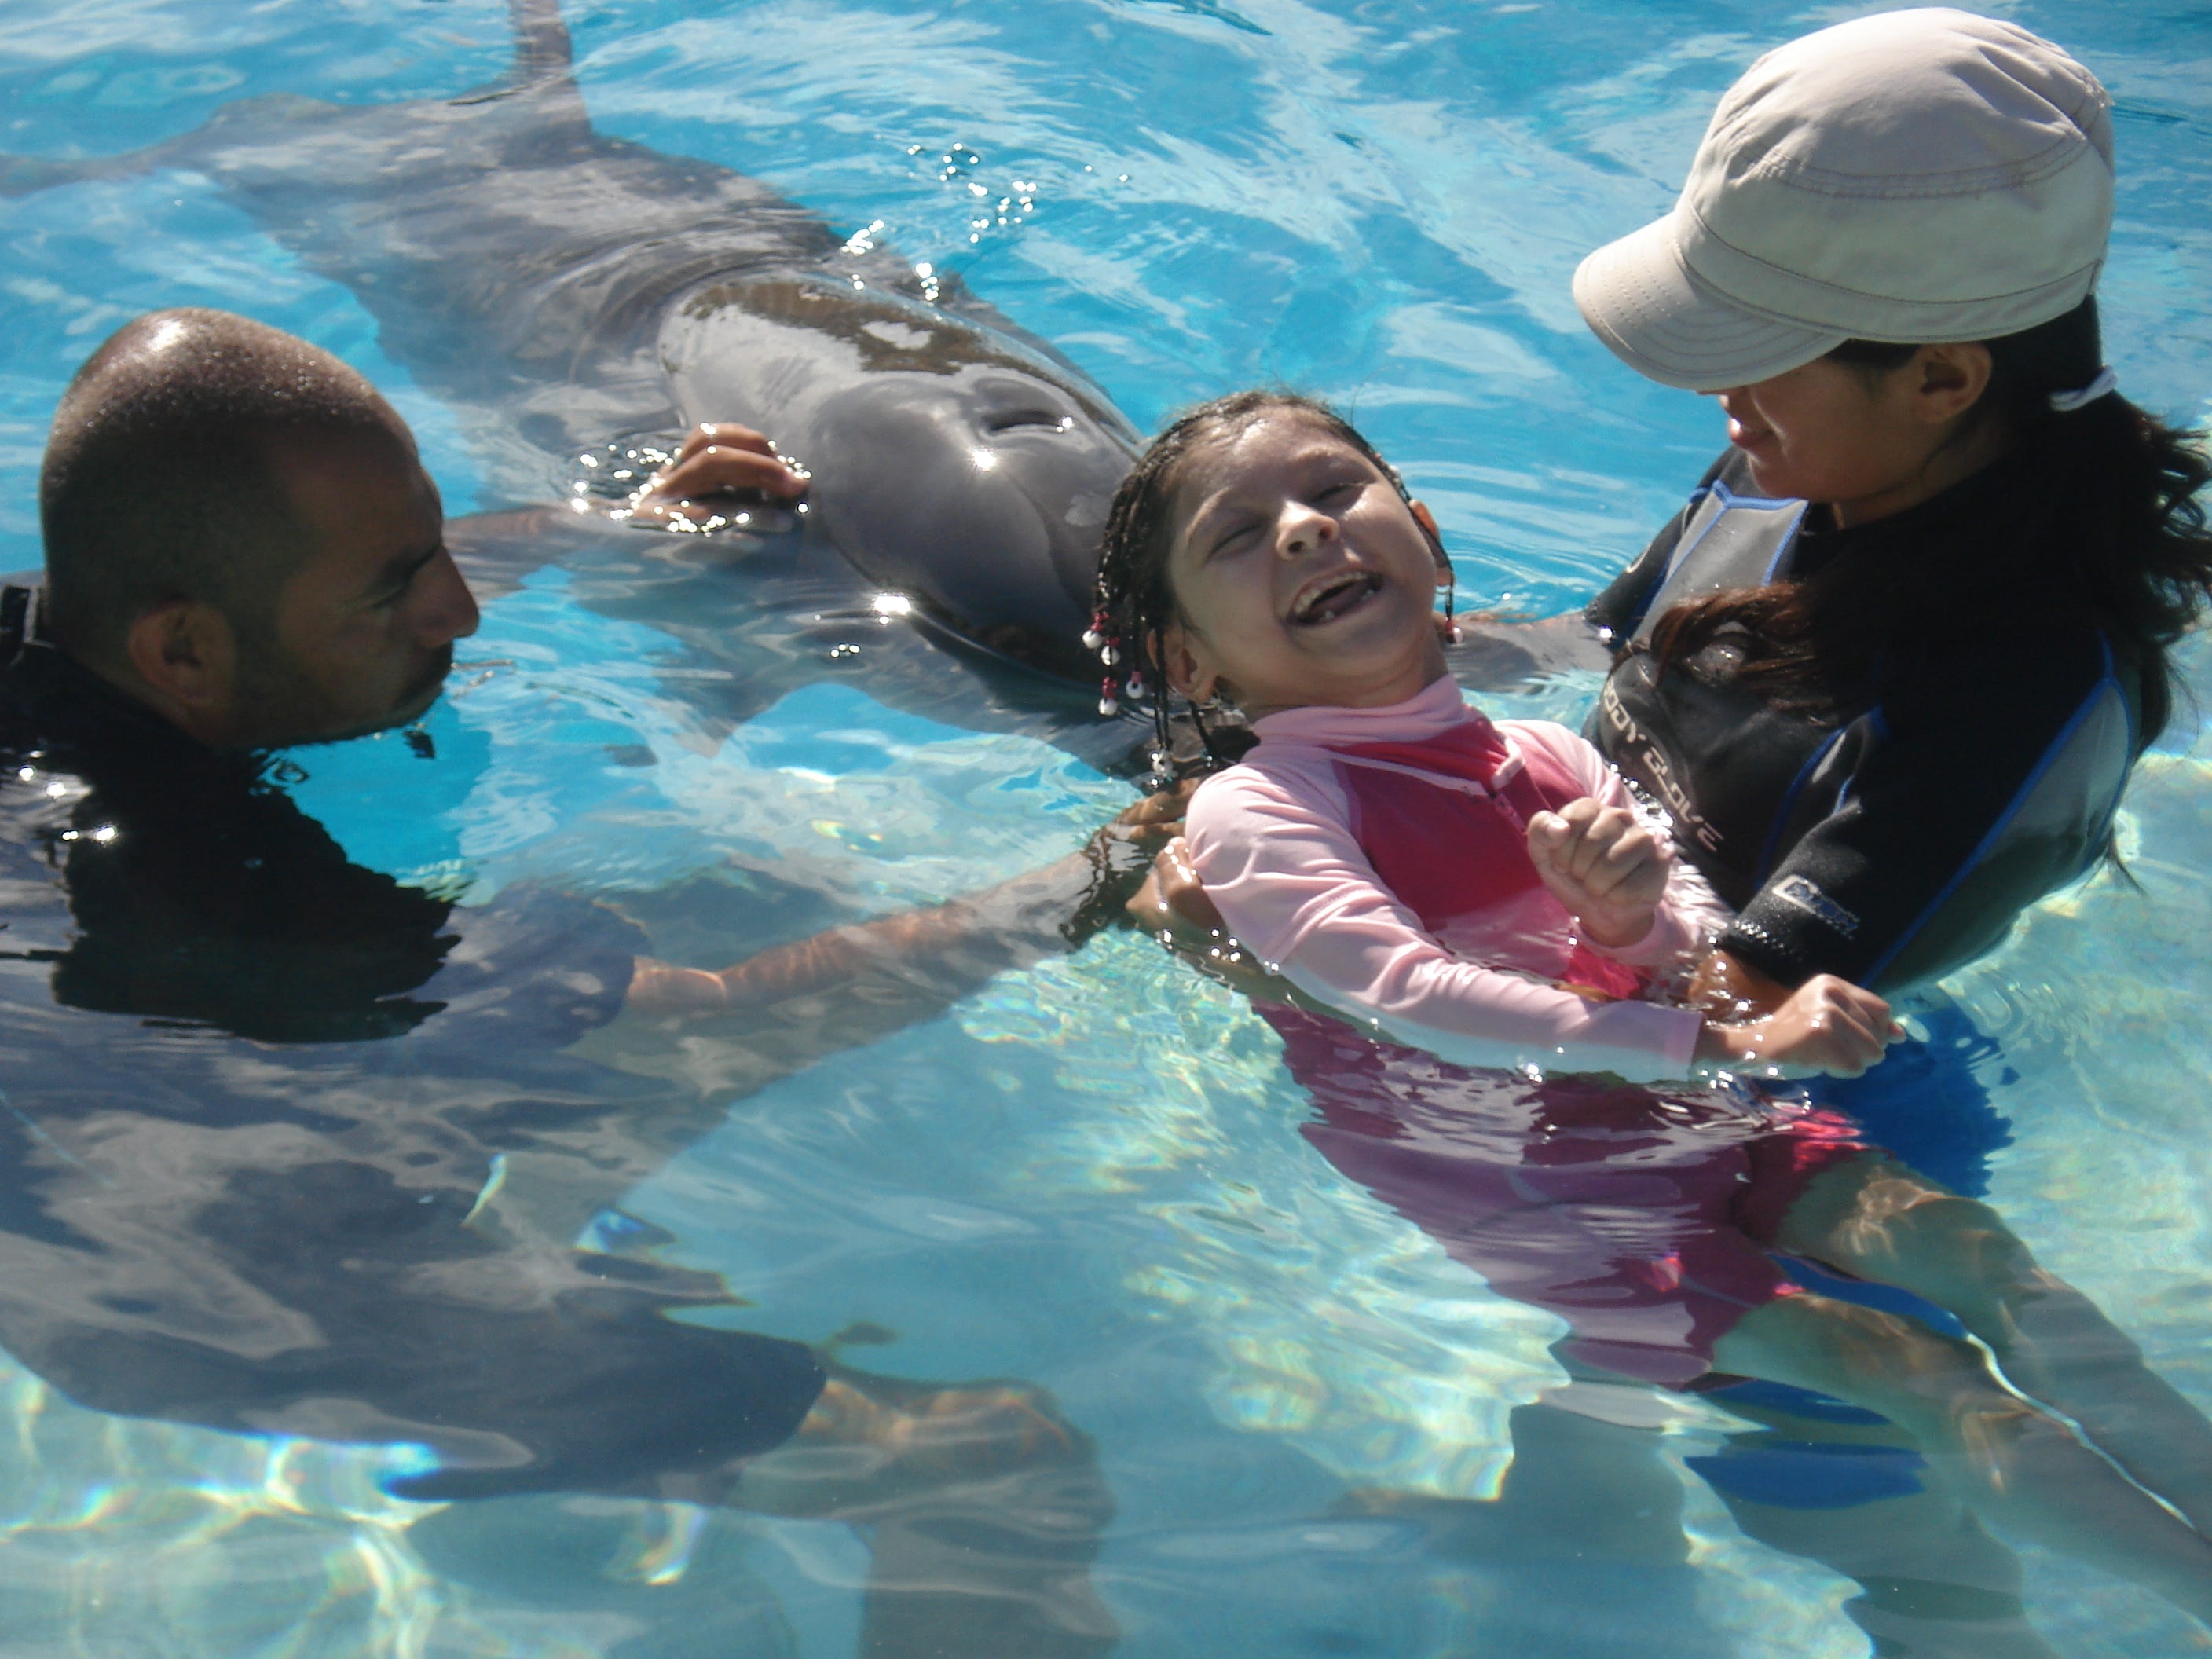 Karizma Vargas has traveled the world, including to swim with dolphins in Mexico.